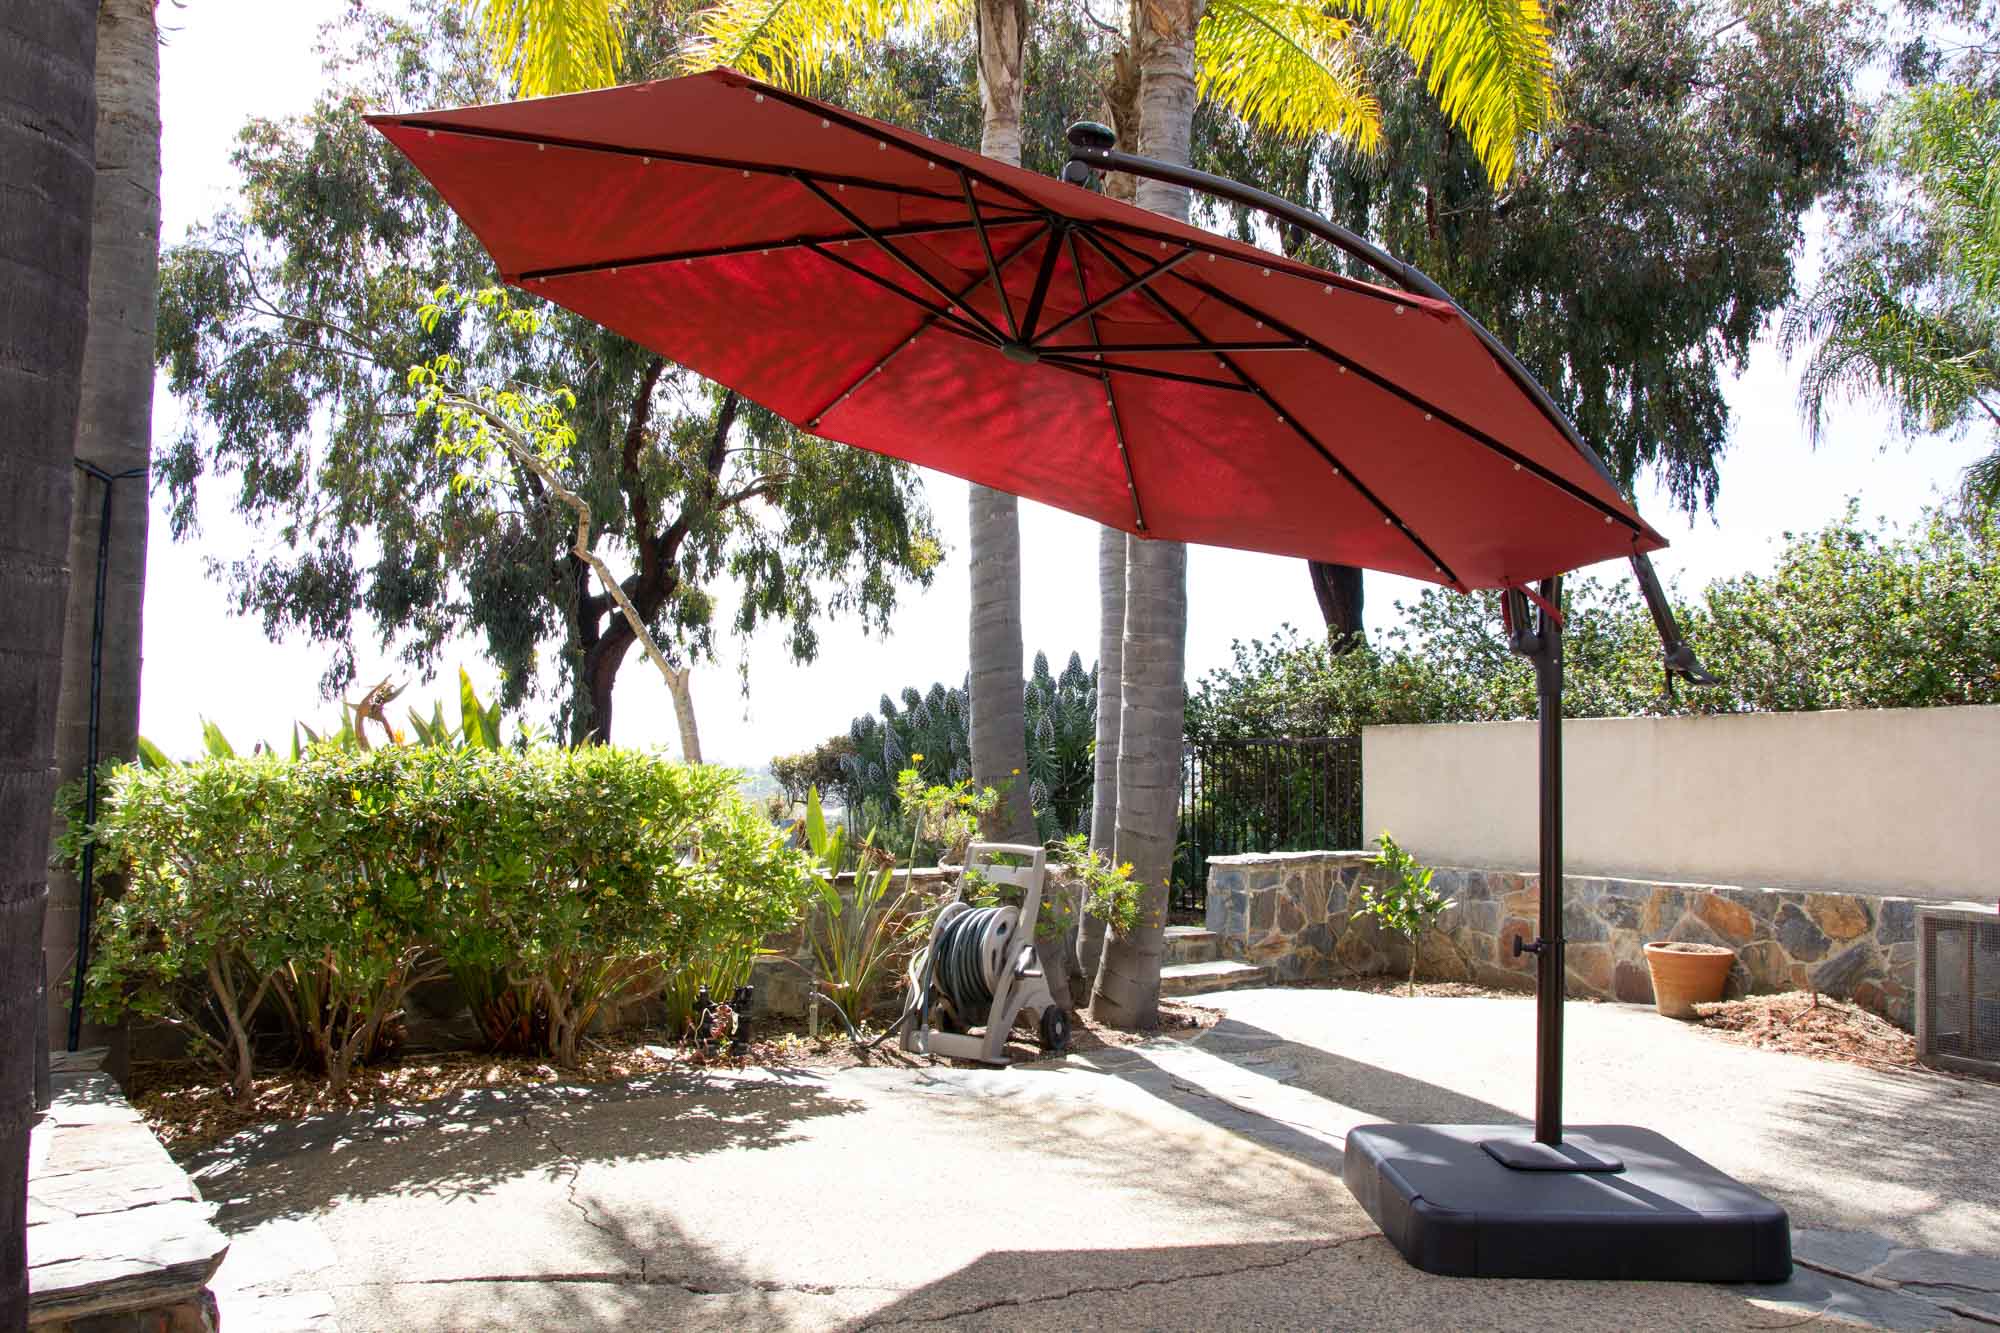 The Best Patio Umbrellas and Stands of 2022 - Reviews by YBD